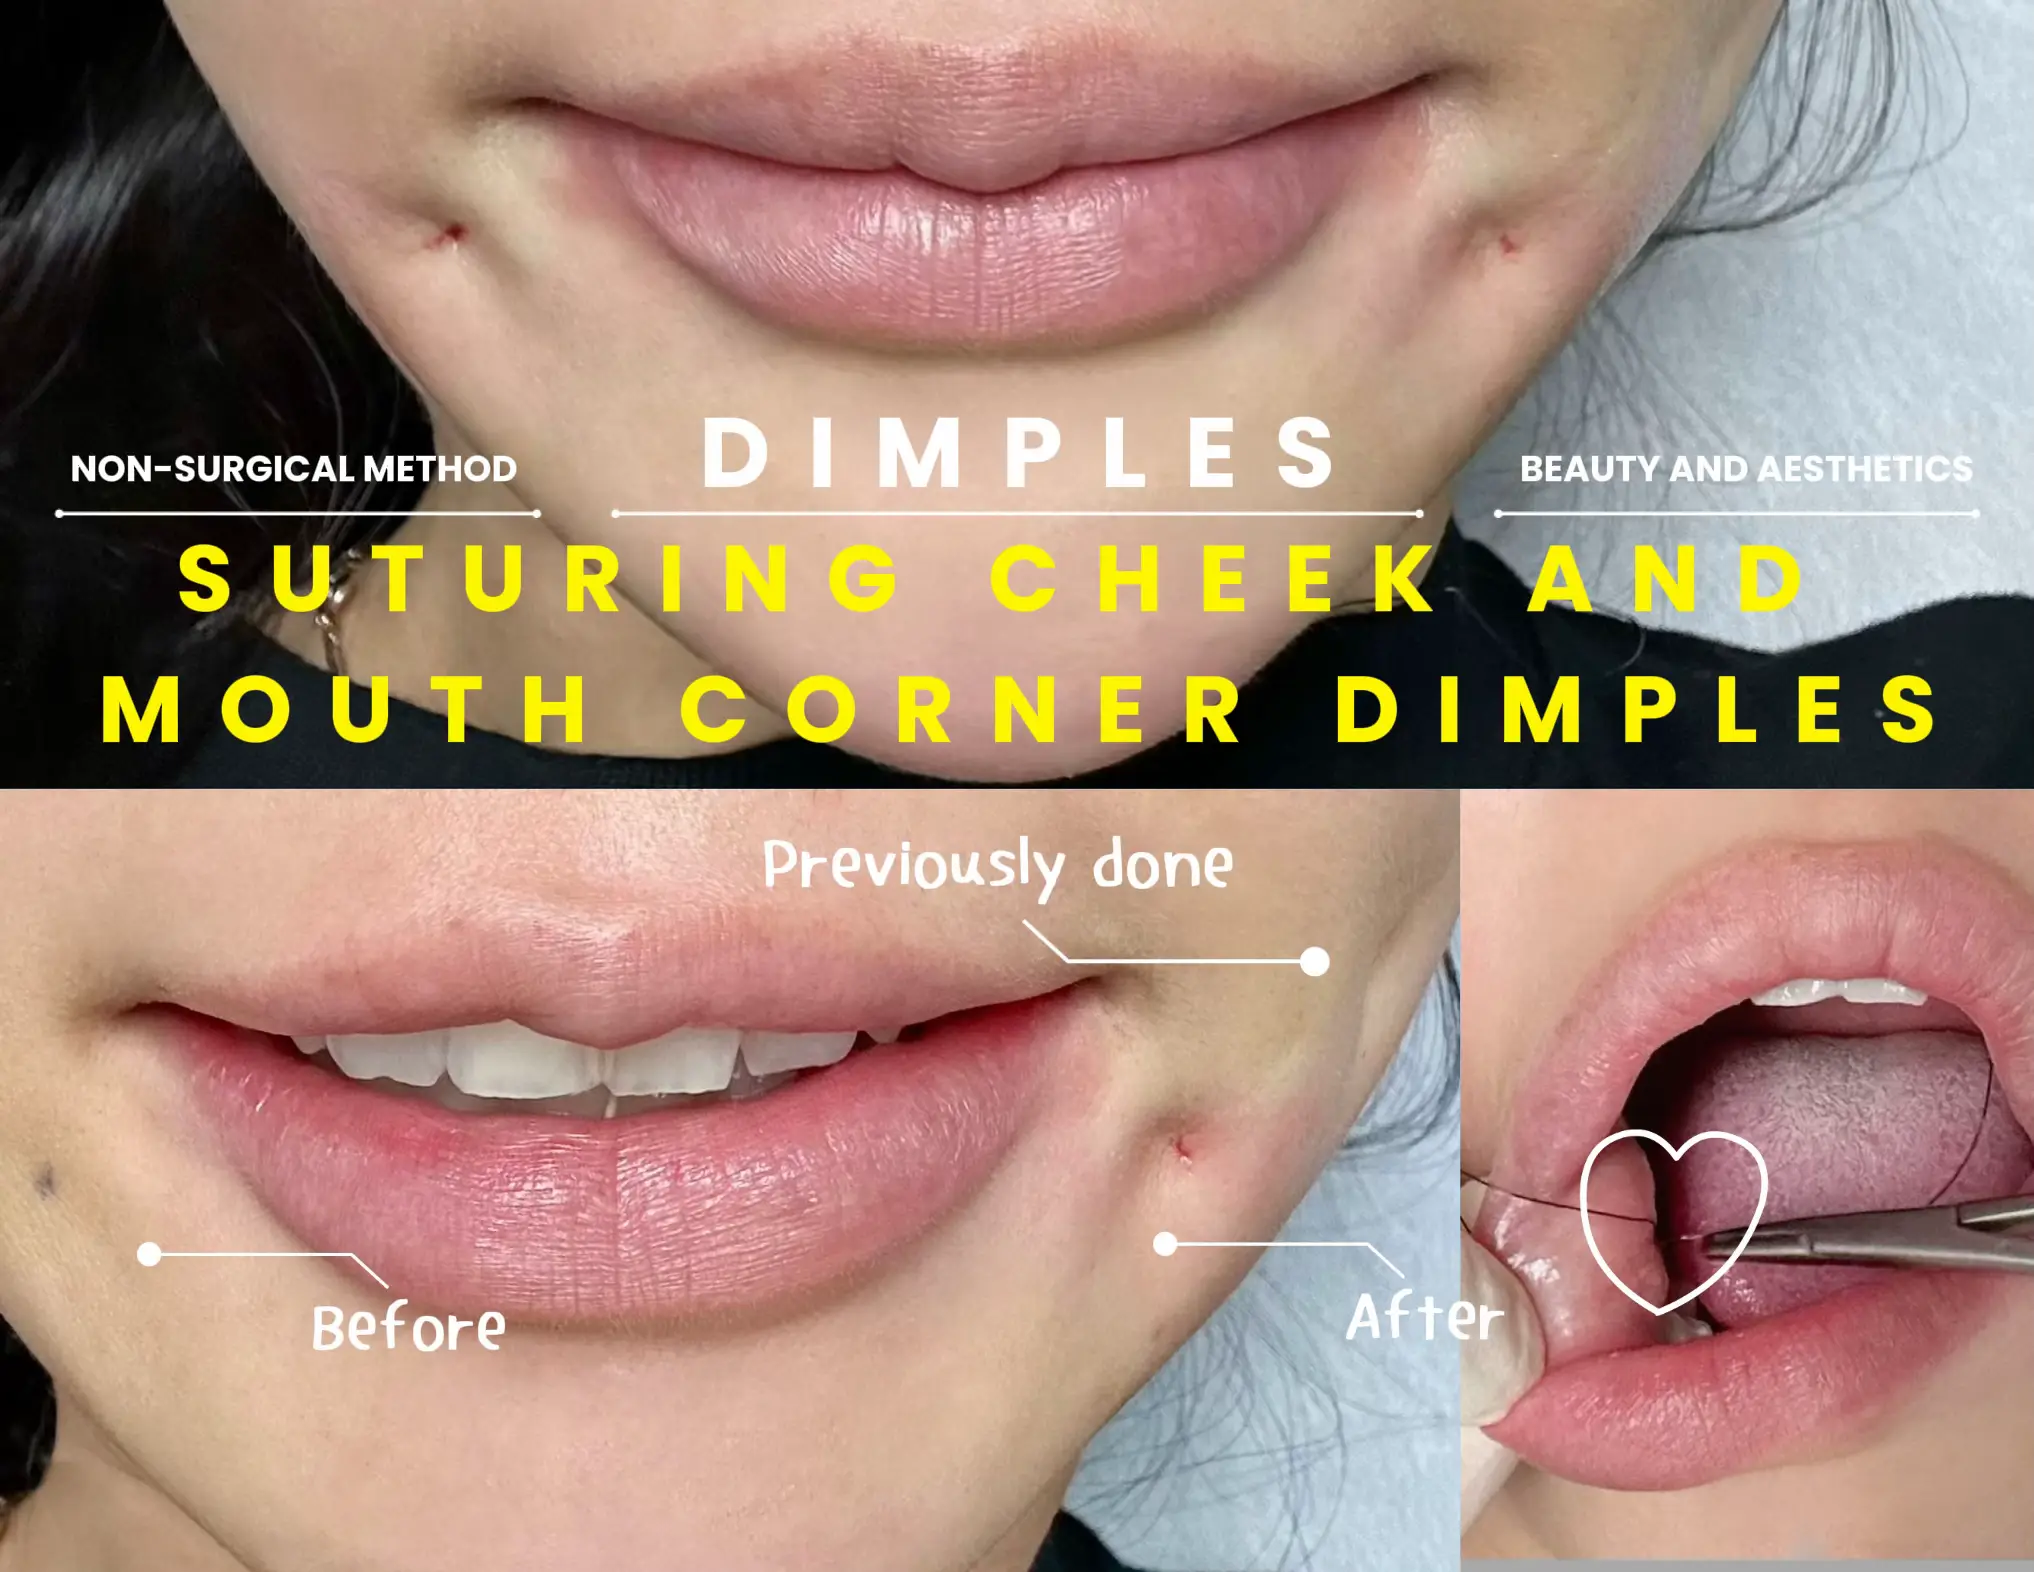 2ND EXPERIENCE WITH NON-SURGICAL DIMPLES!'s images(0)